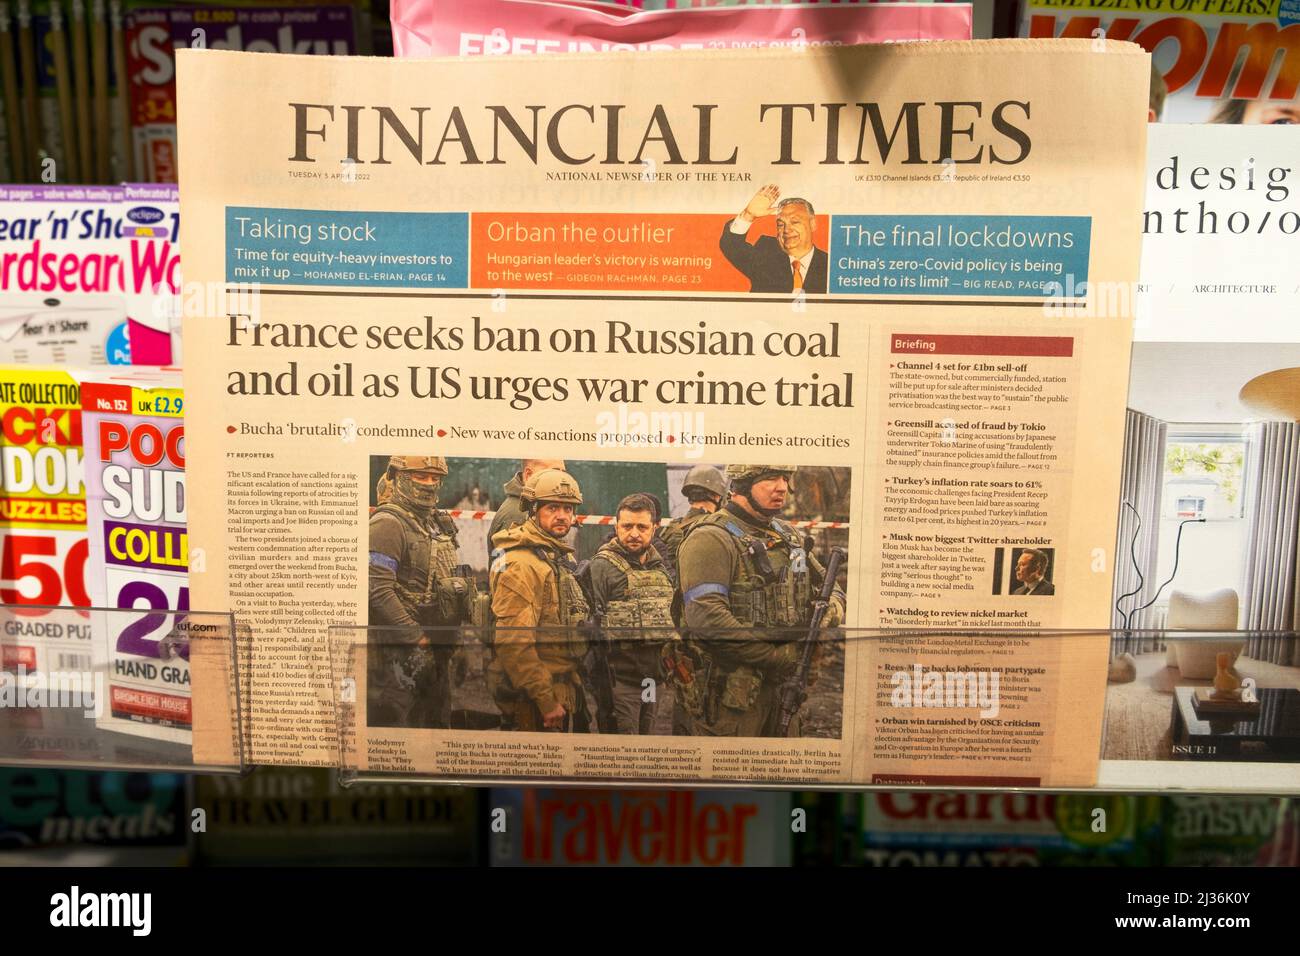 Financial Times FT newspaper headline 'France seeks ban on Russian coal and oil as US urges war crime trial'  5 April 2022 London England UK Stock Photo